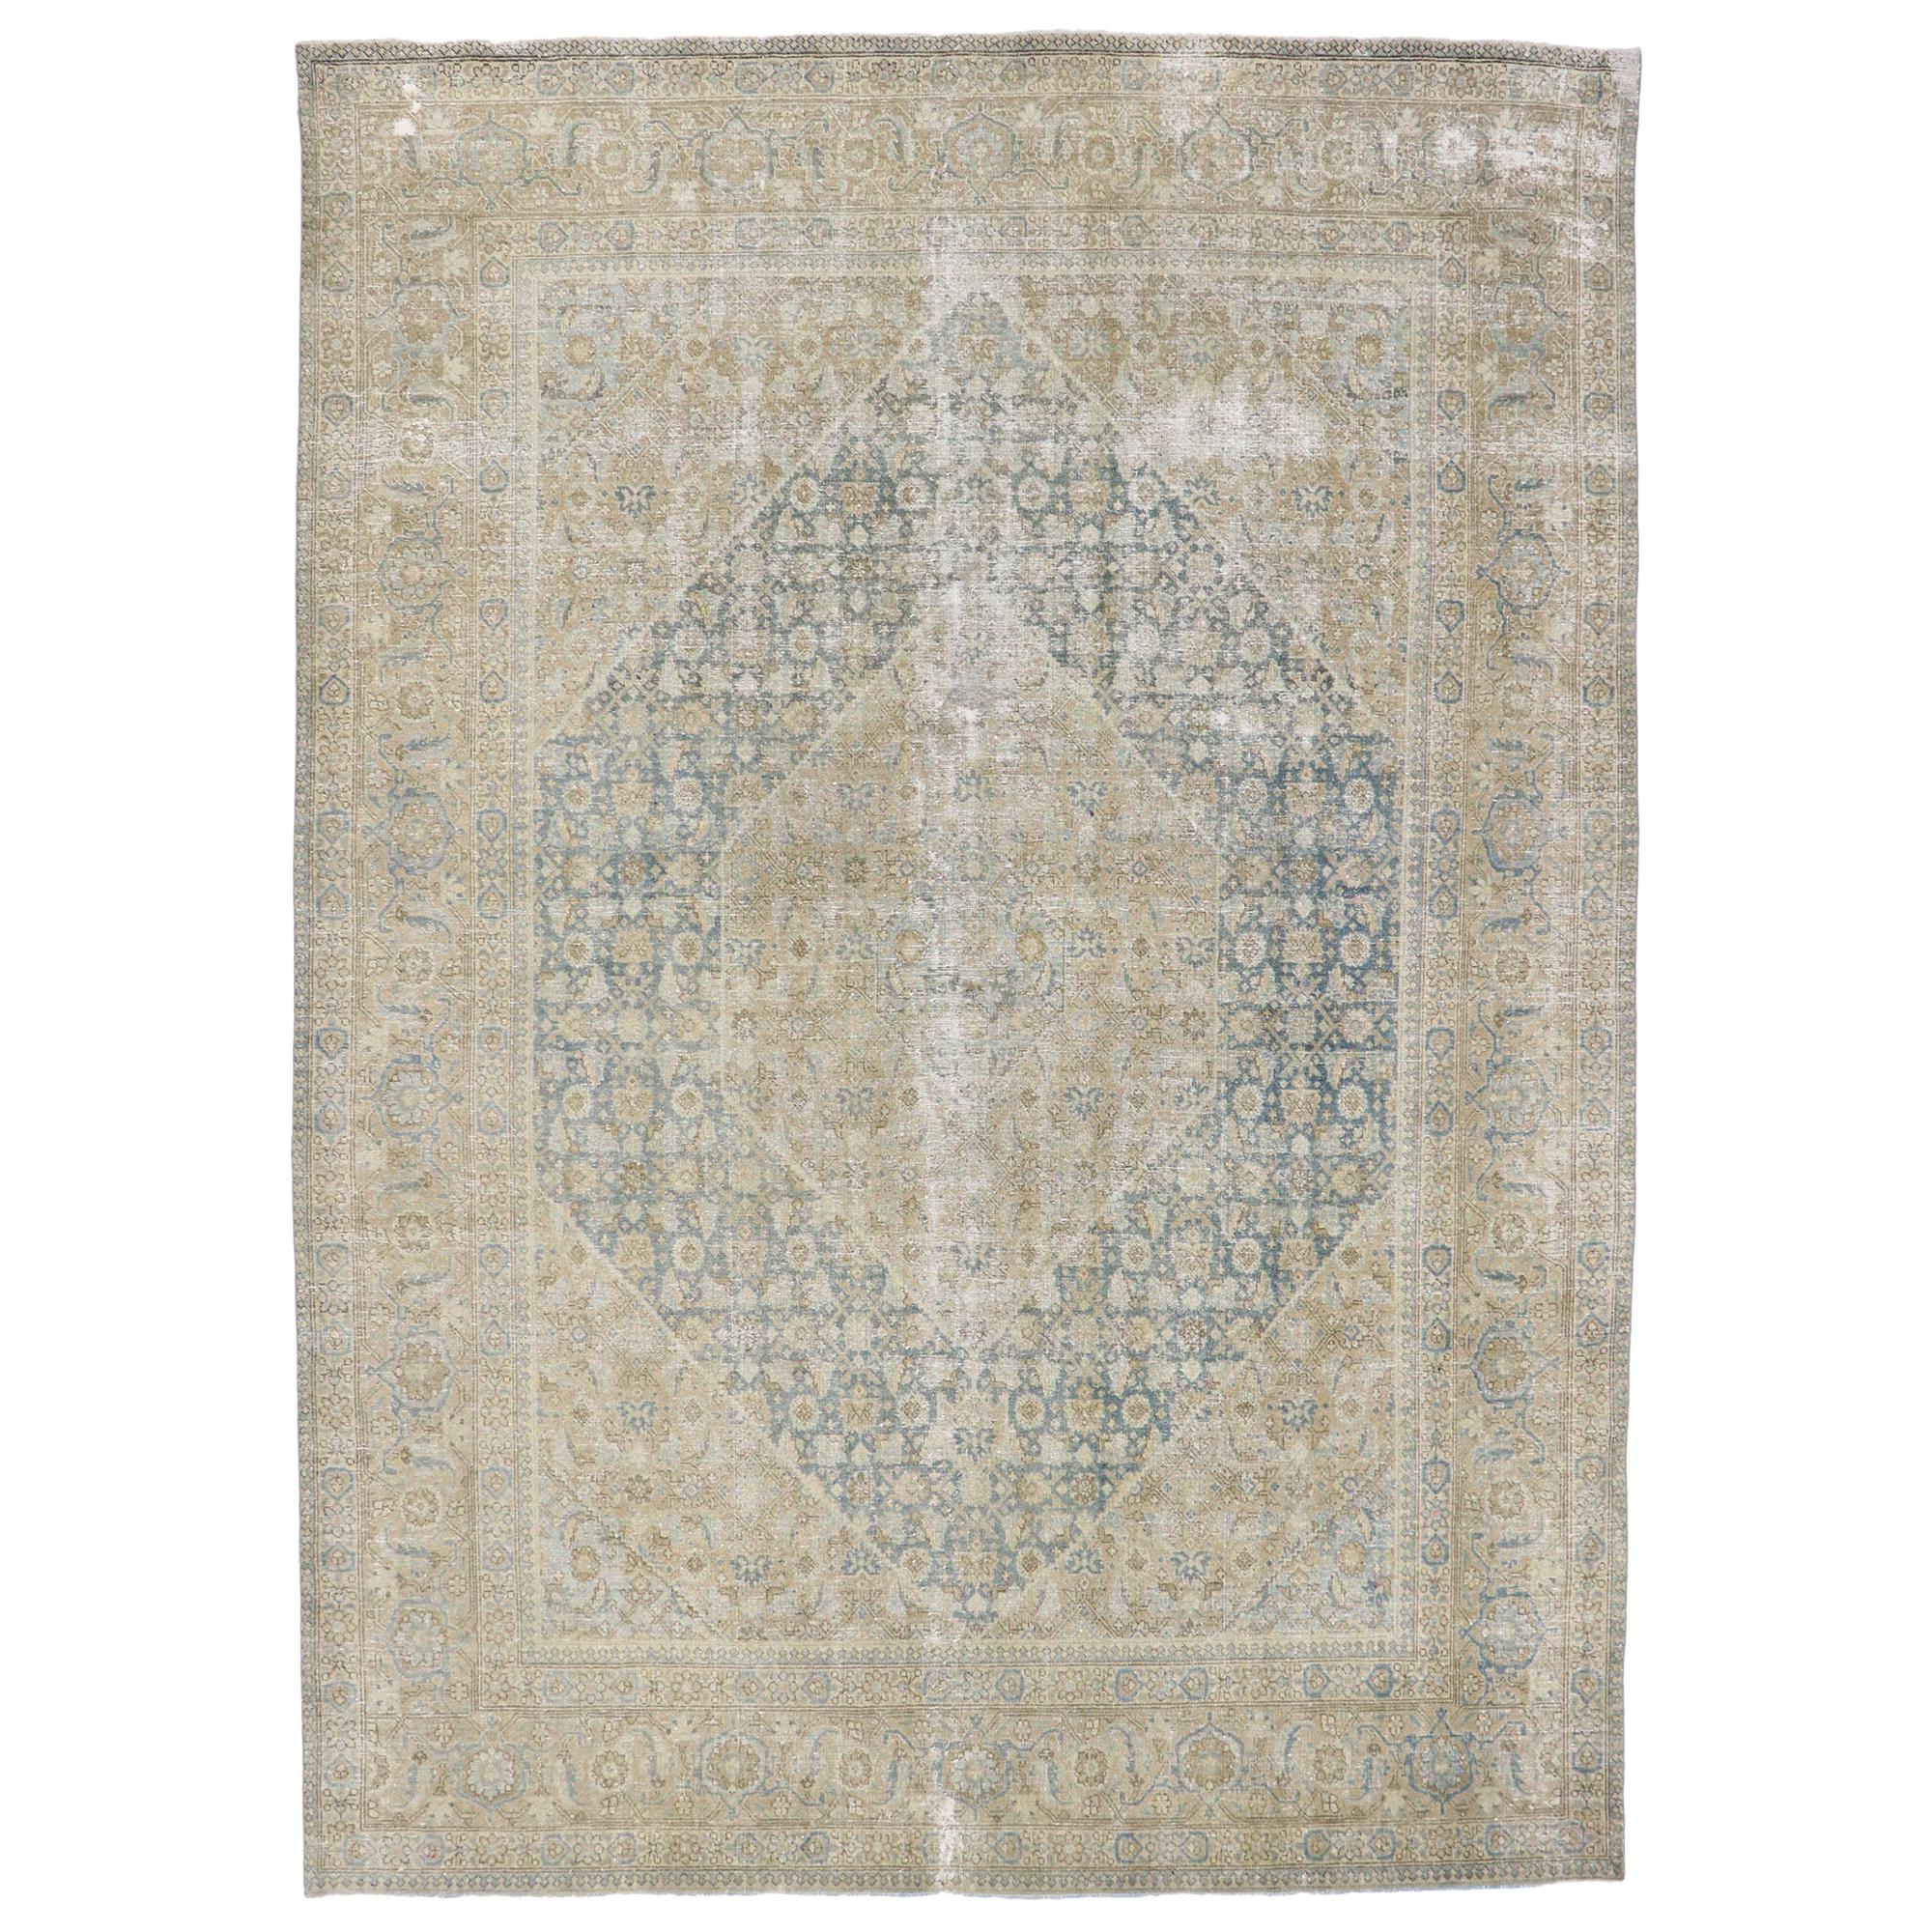 Distressed Antique Persian Mahi Tabriz Rug with Modern Rustic Style For Sale